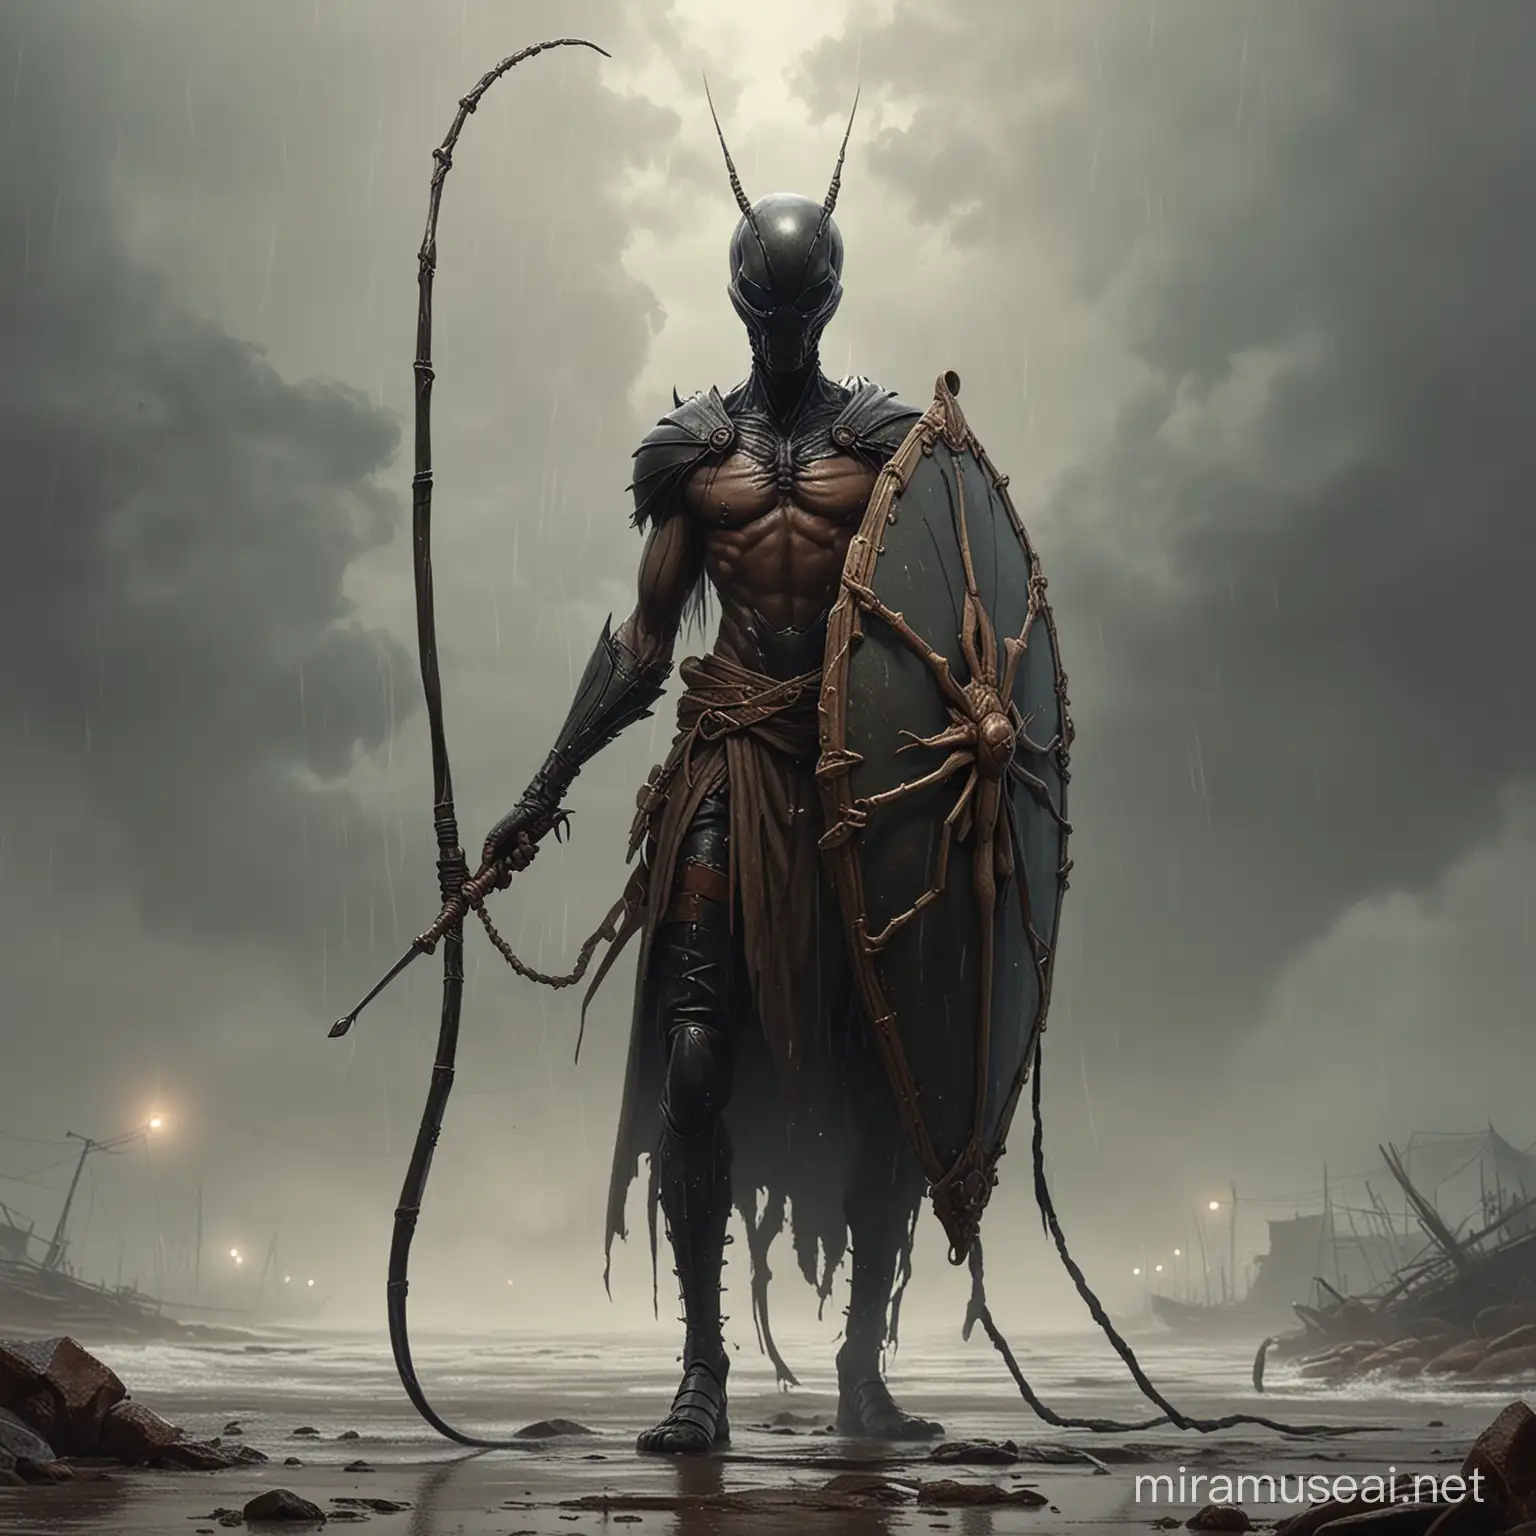 Tall Ant Creature with Chitin Shield and Whip in Stormy Fog